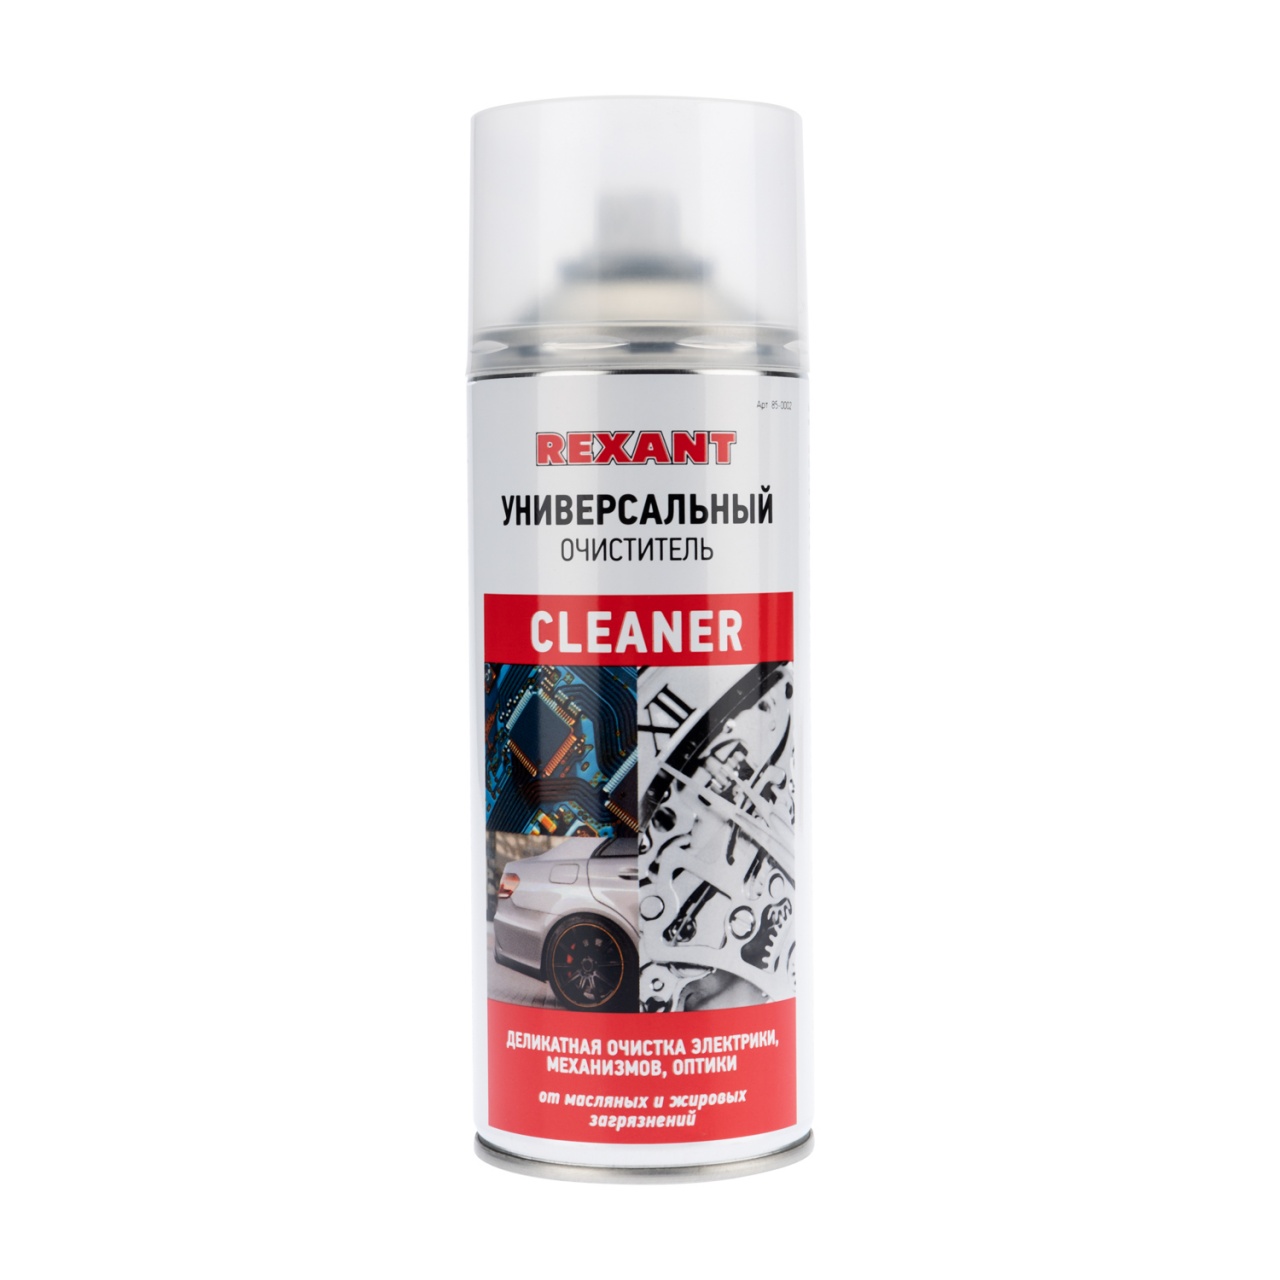   CLEANER, 520 (400),  REXANT